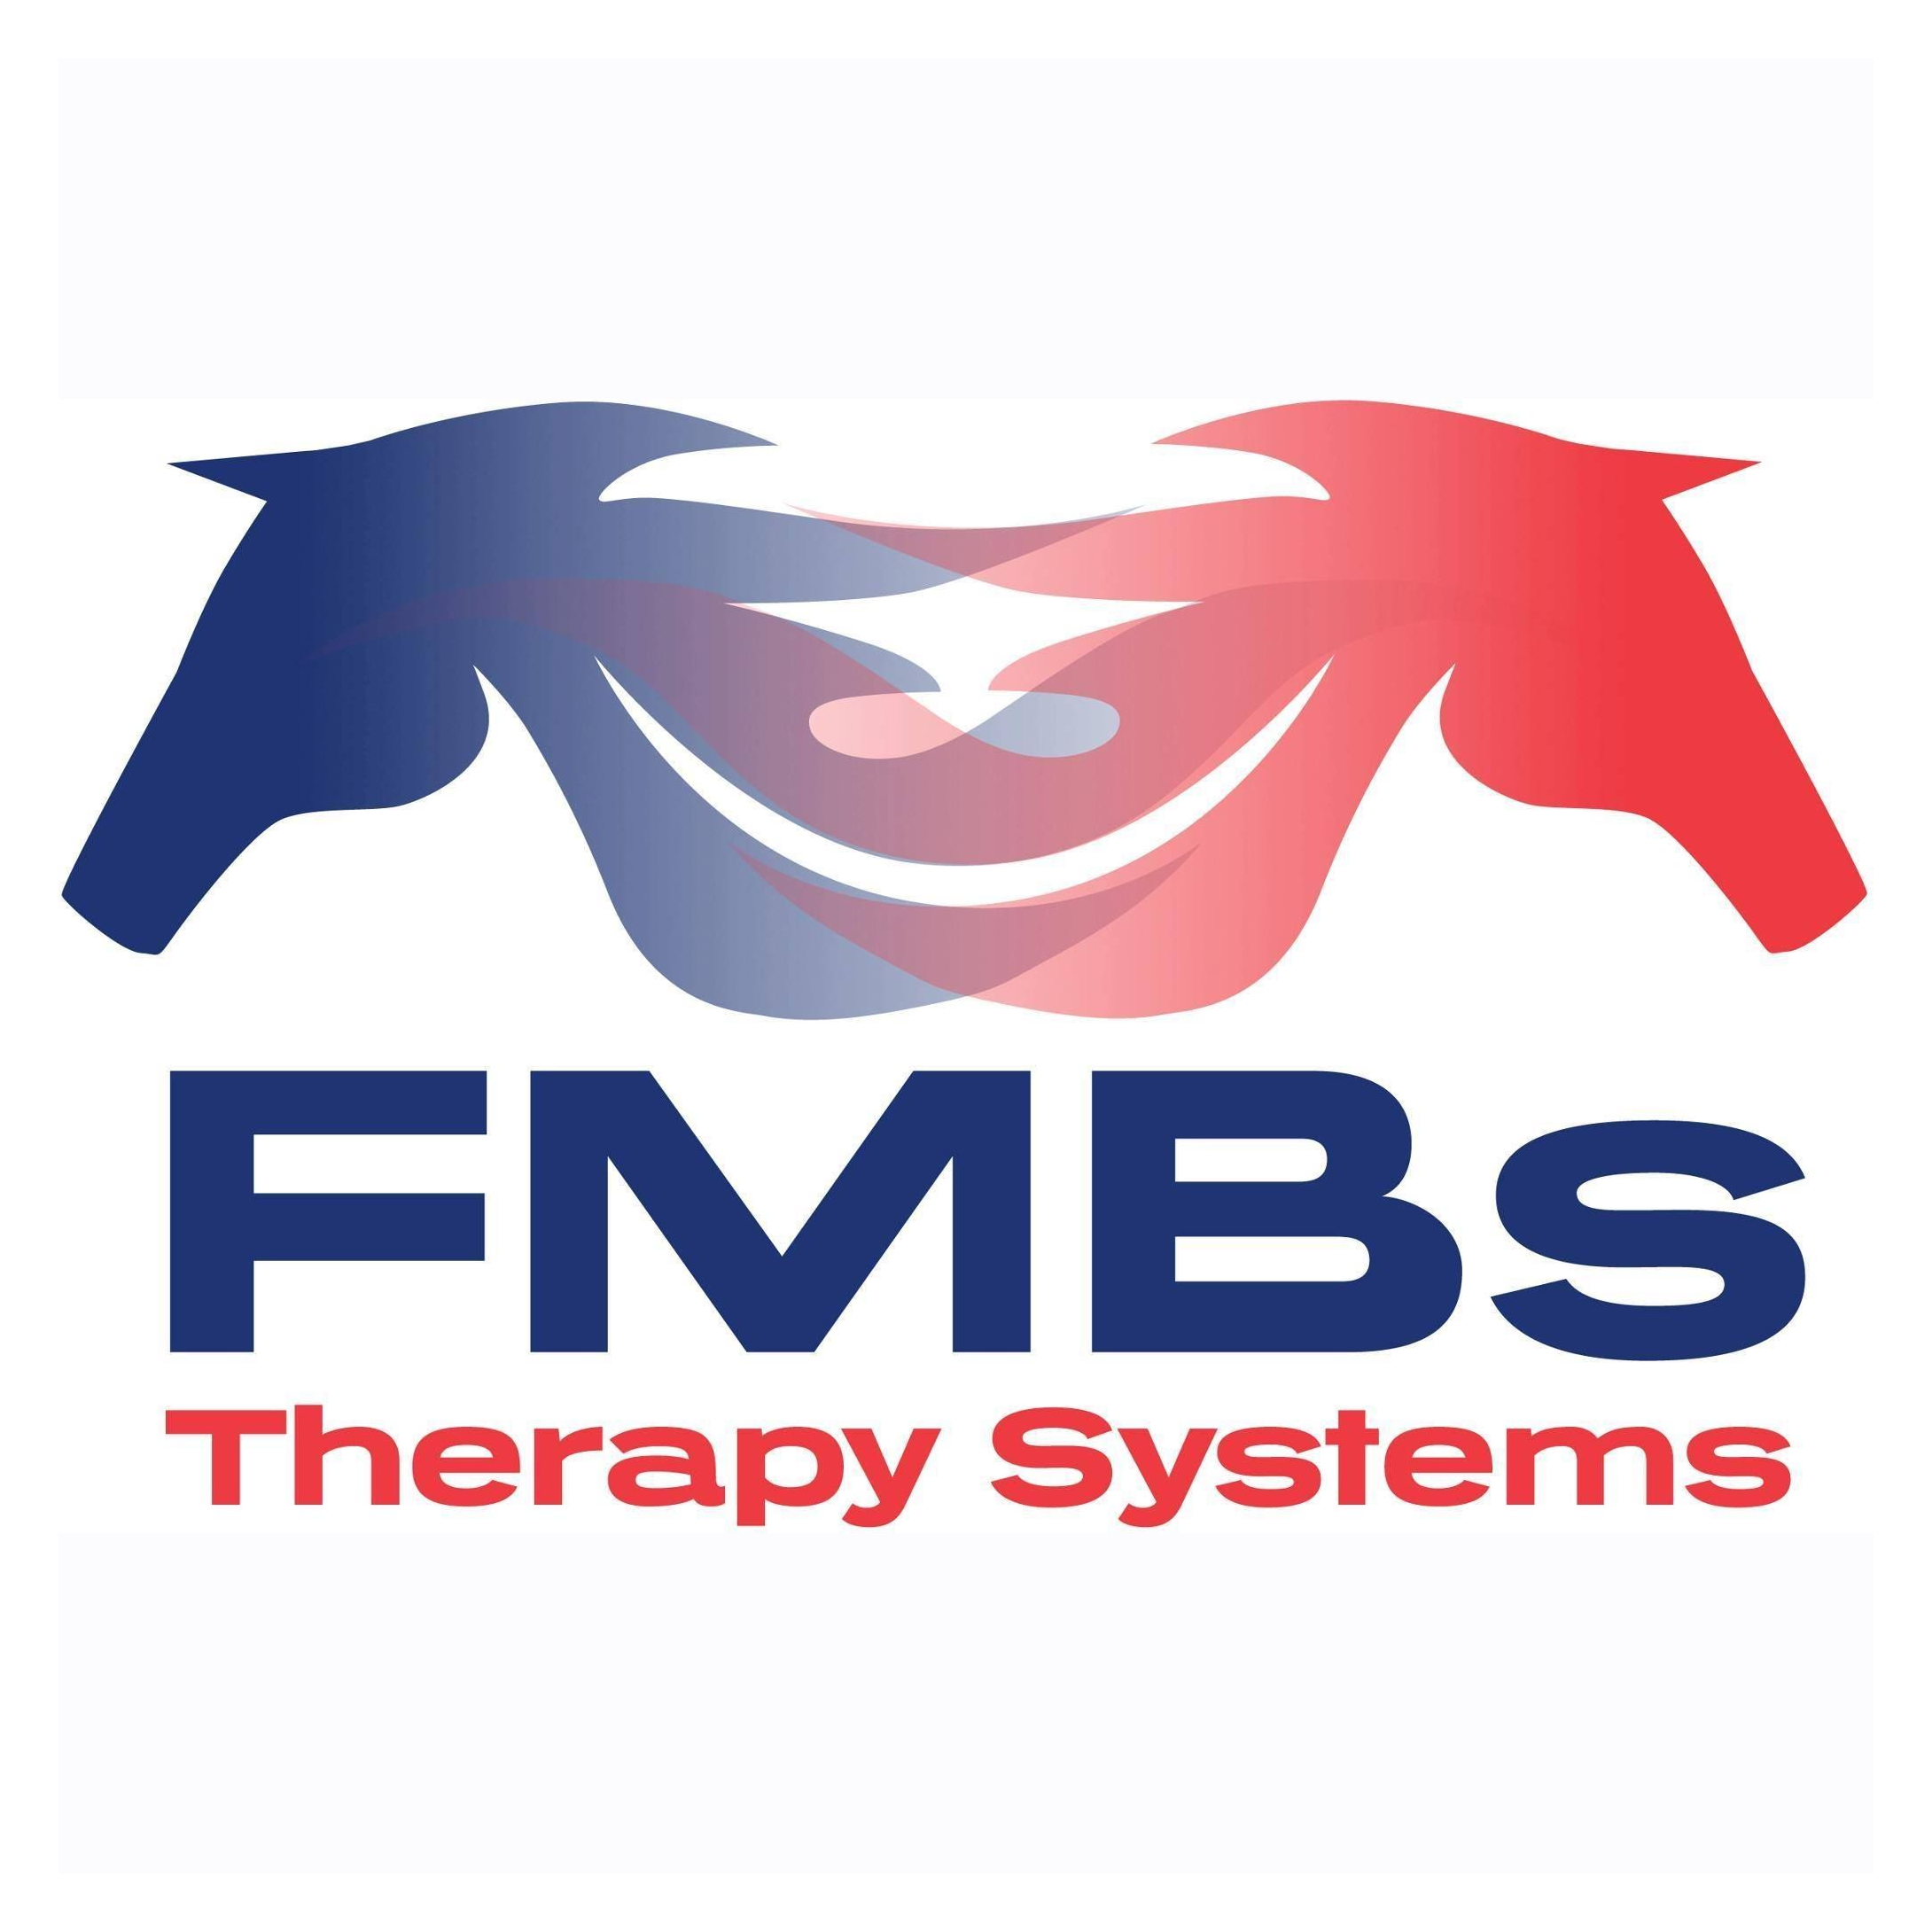 07. FMBS Therapy Systems